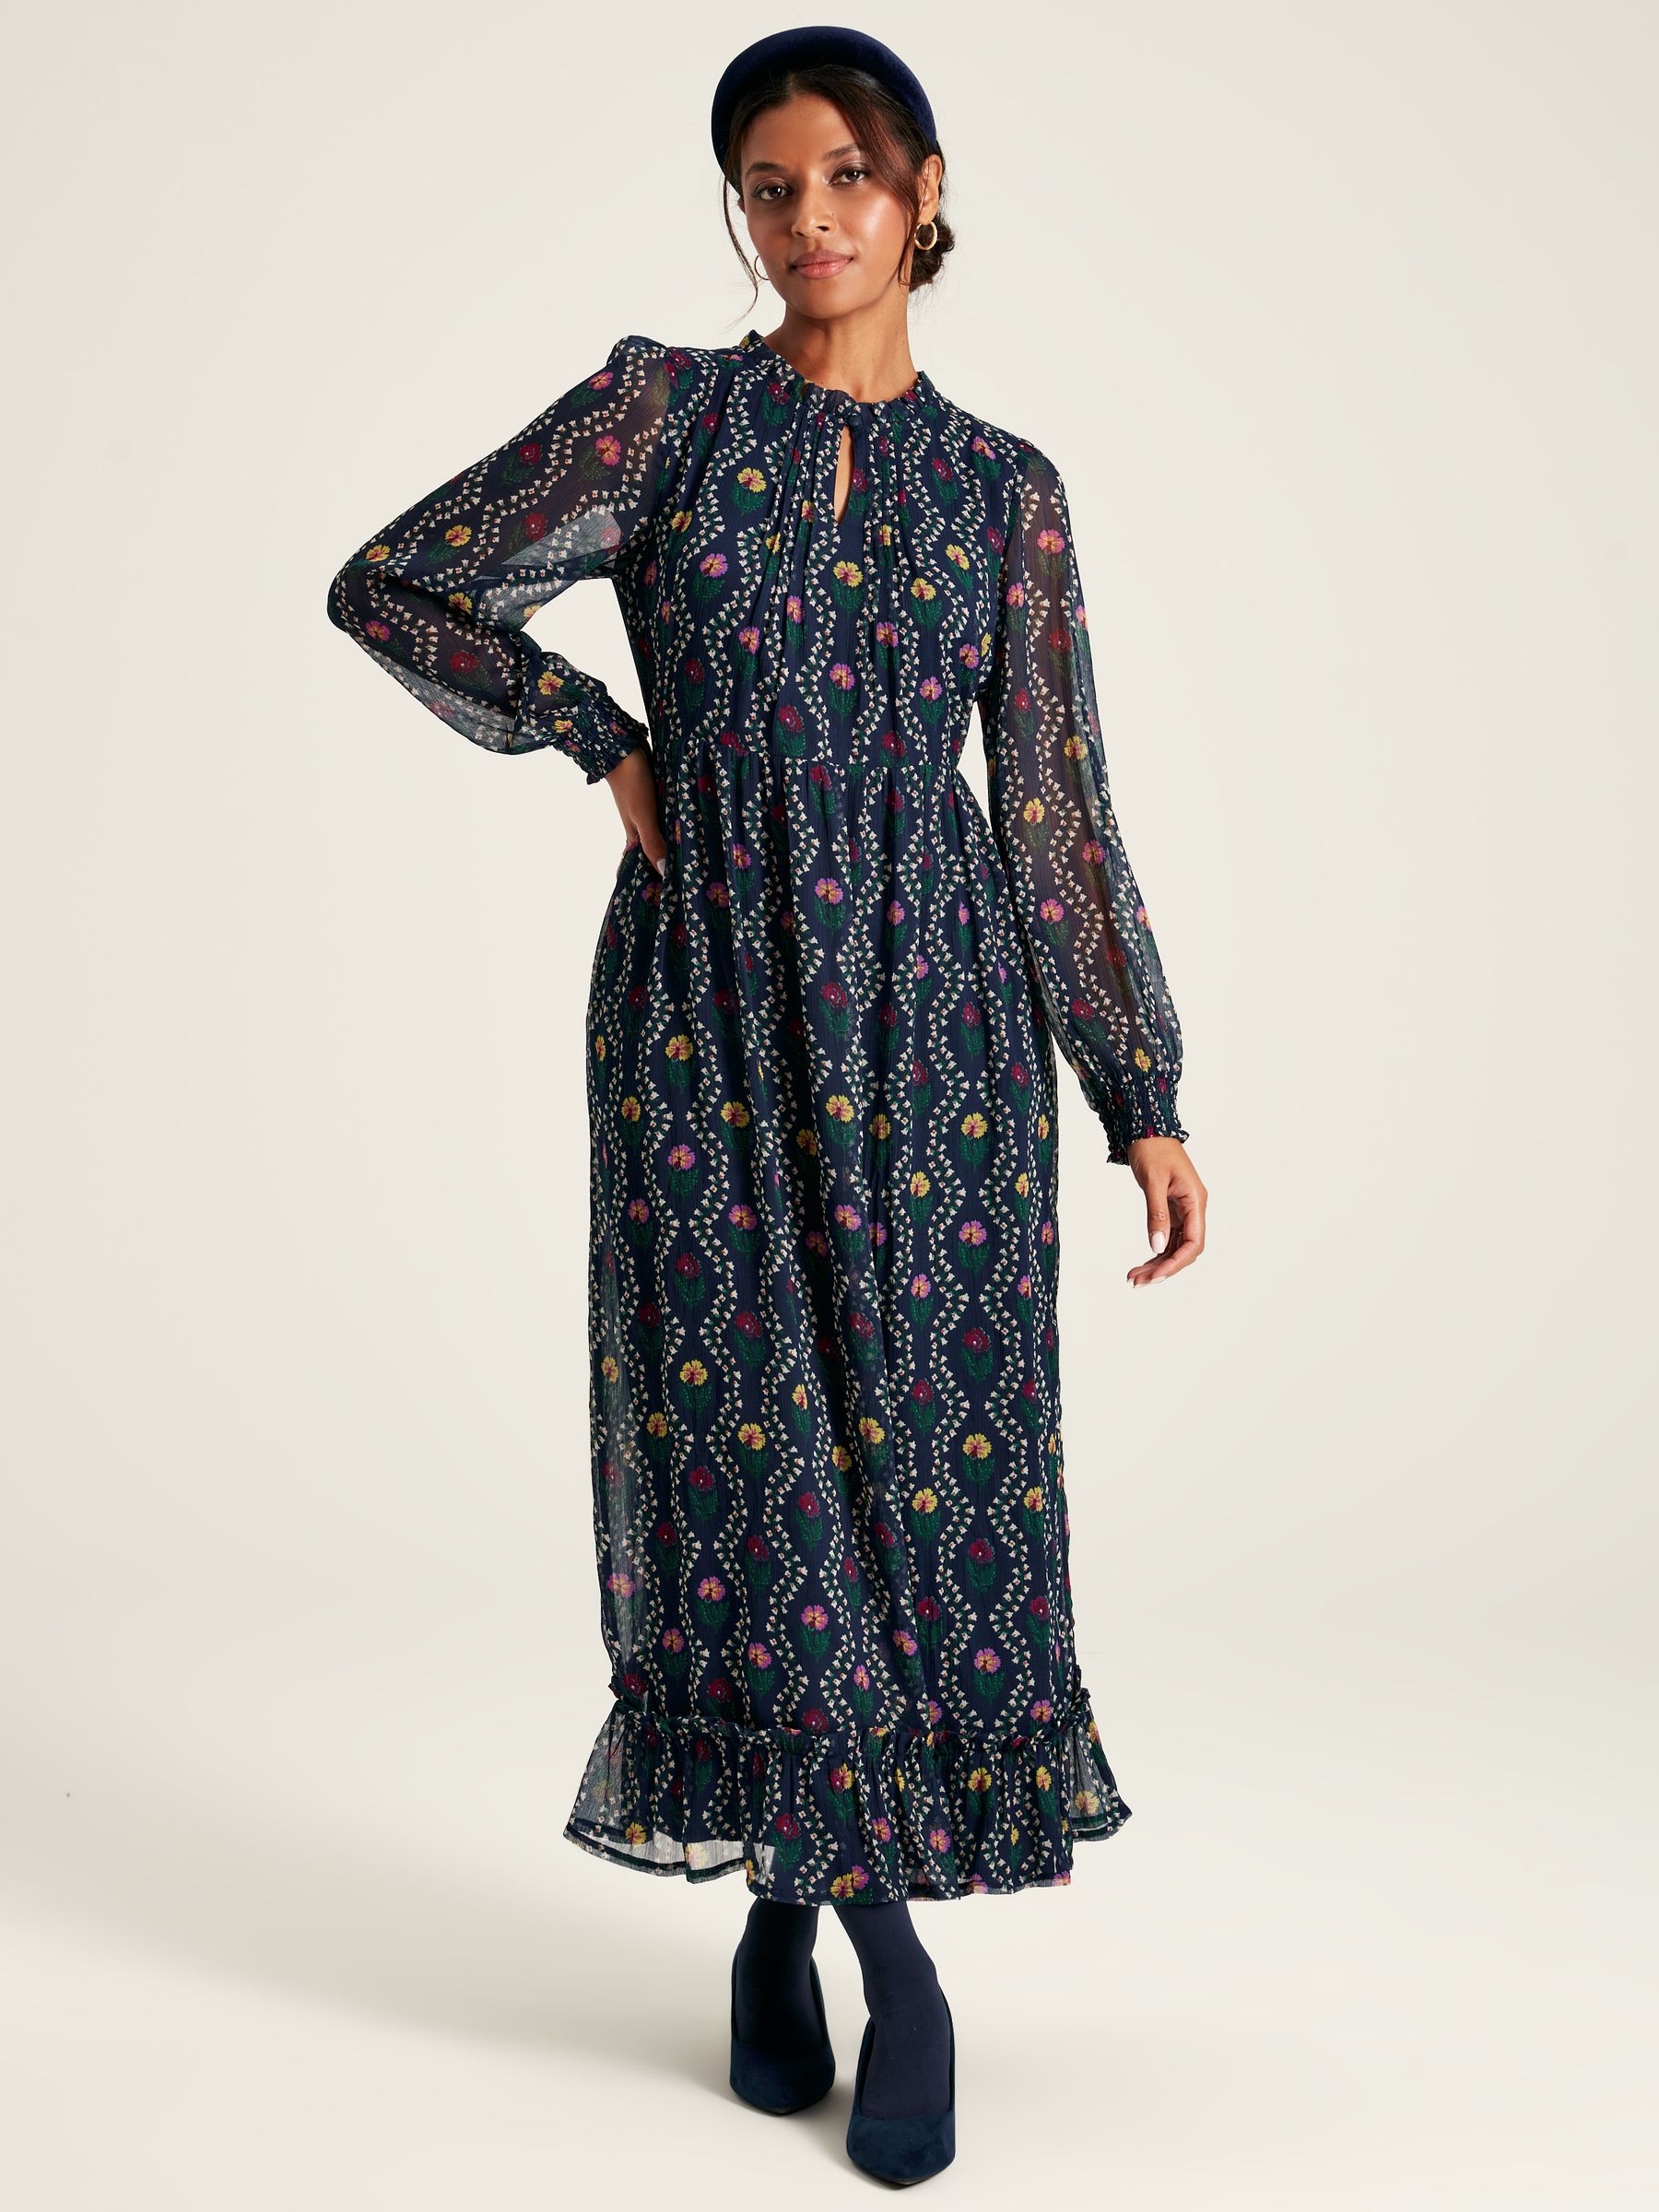 Buy Helena Navy Floral Printed Dress from the Joules online shop